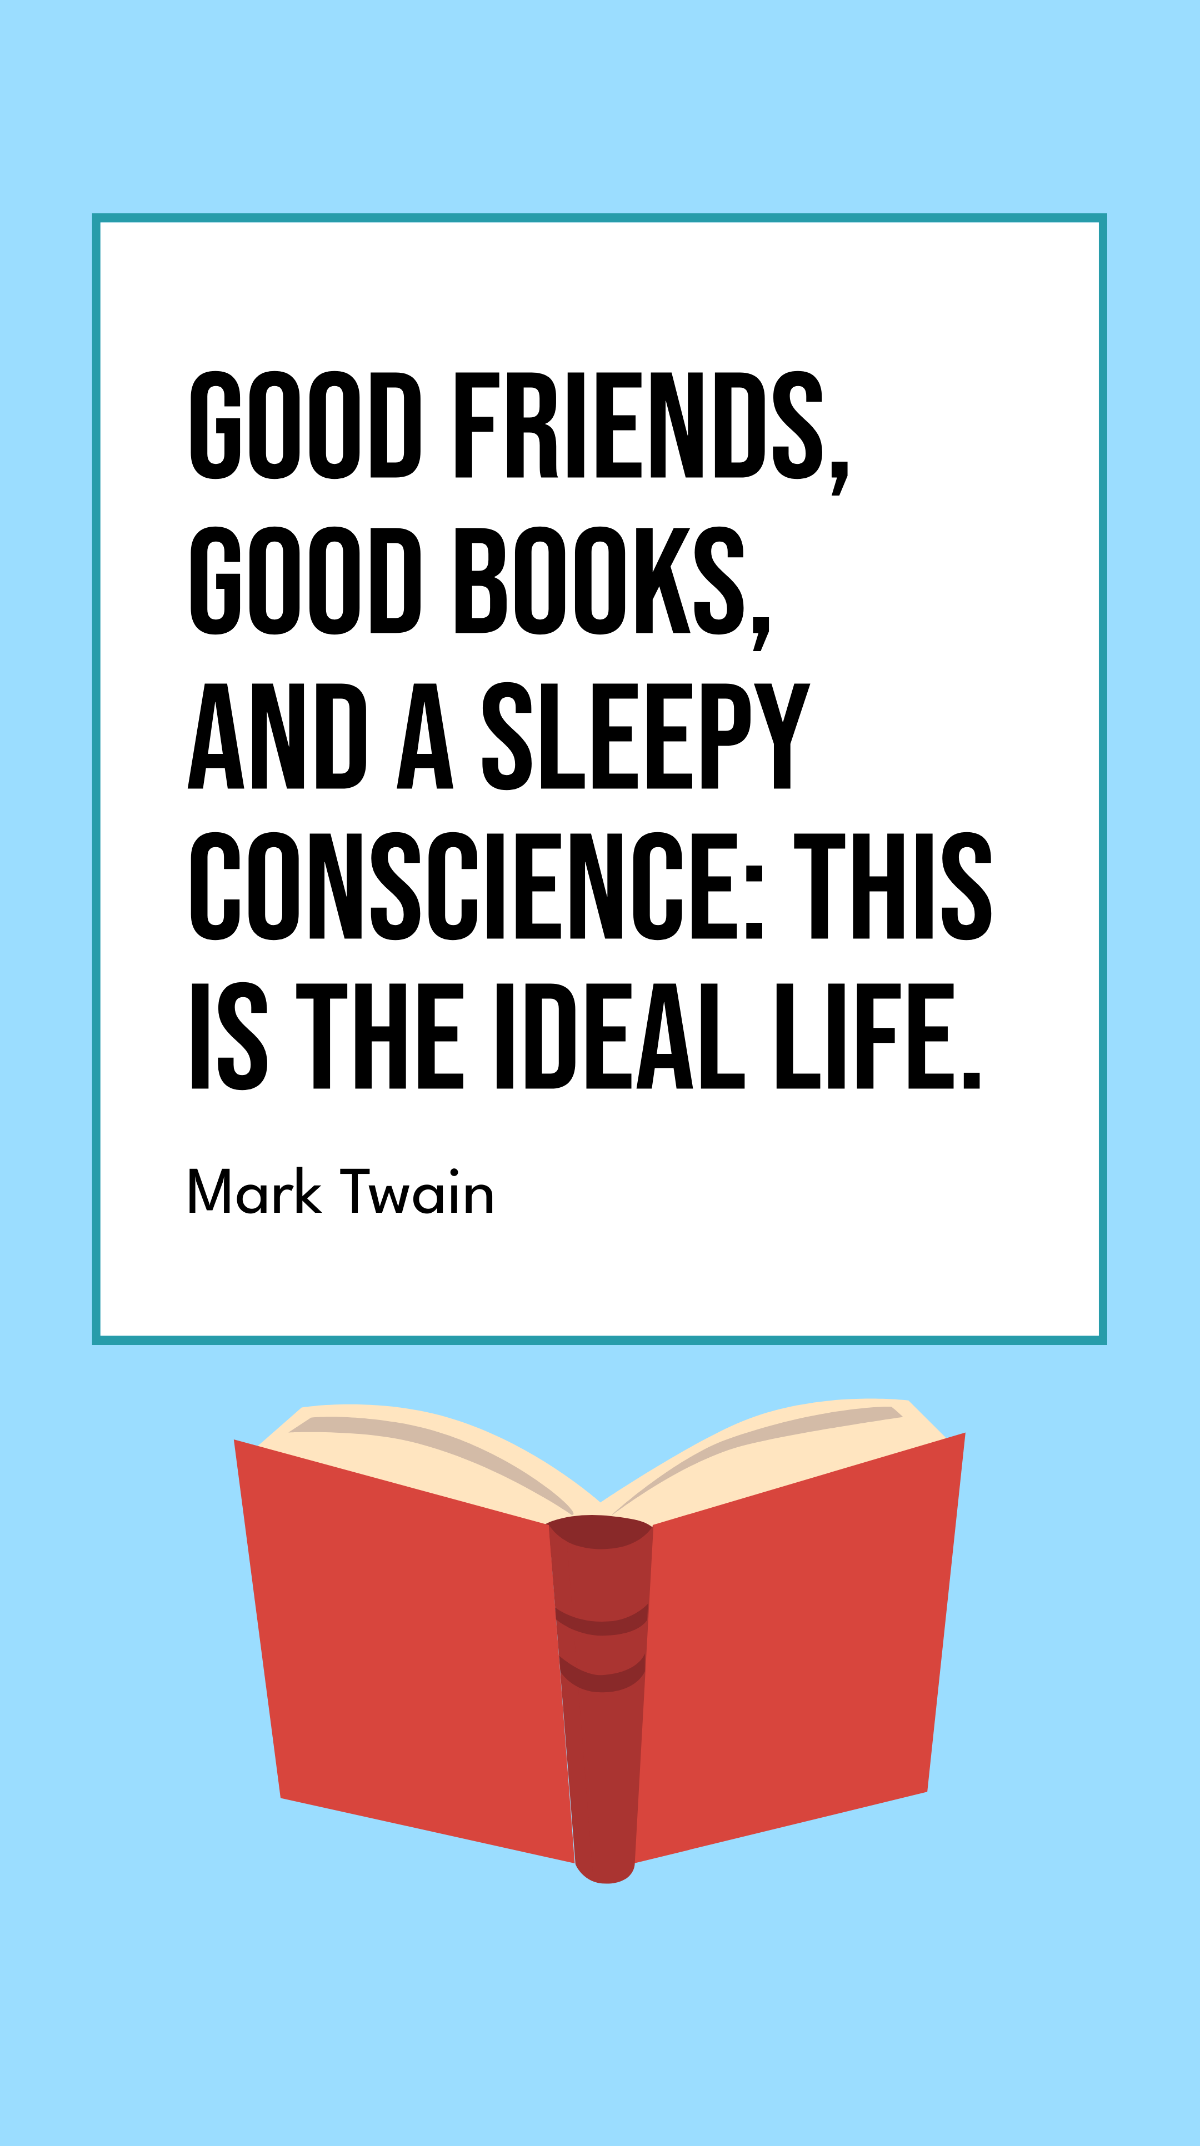 Mark Twain - Good friends, good books, and a sleepy conscience: this is the ideal life Template